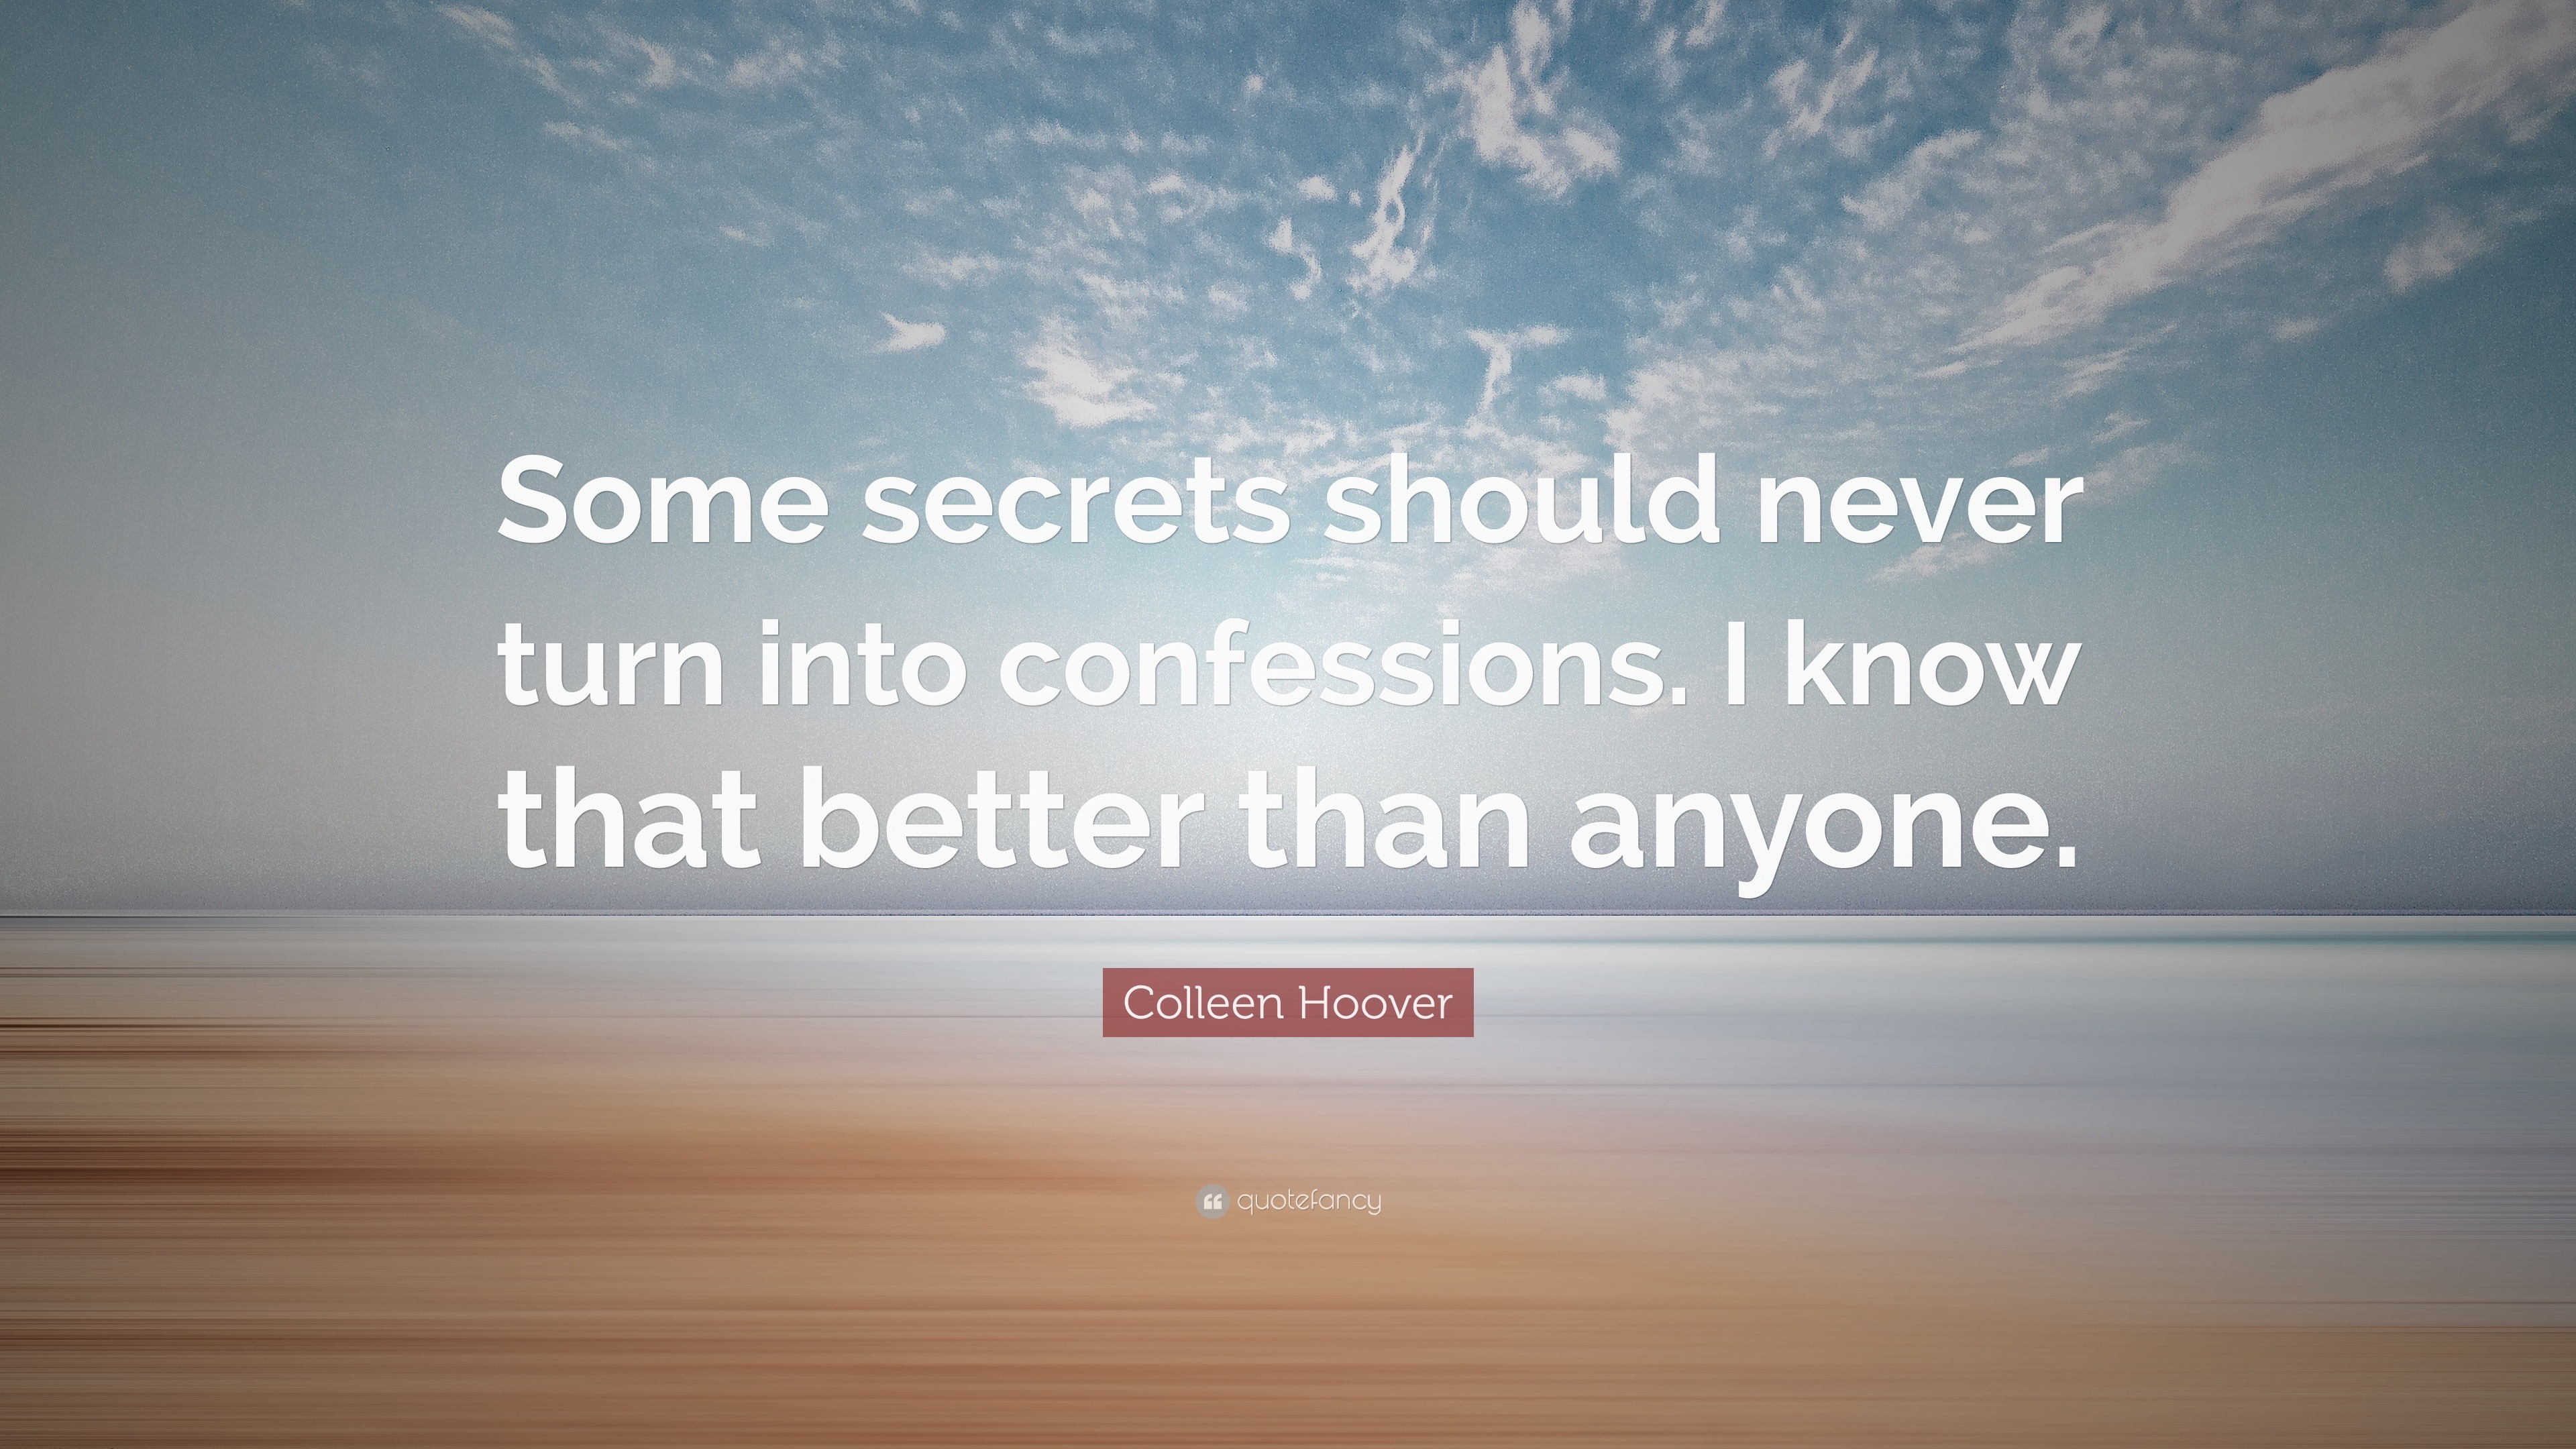 Colleen Hoover Quote: “Some secrets should never turn into confessions ...